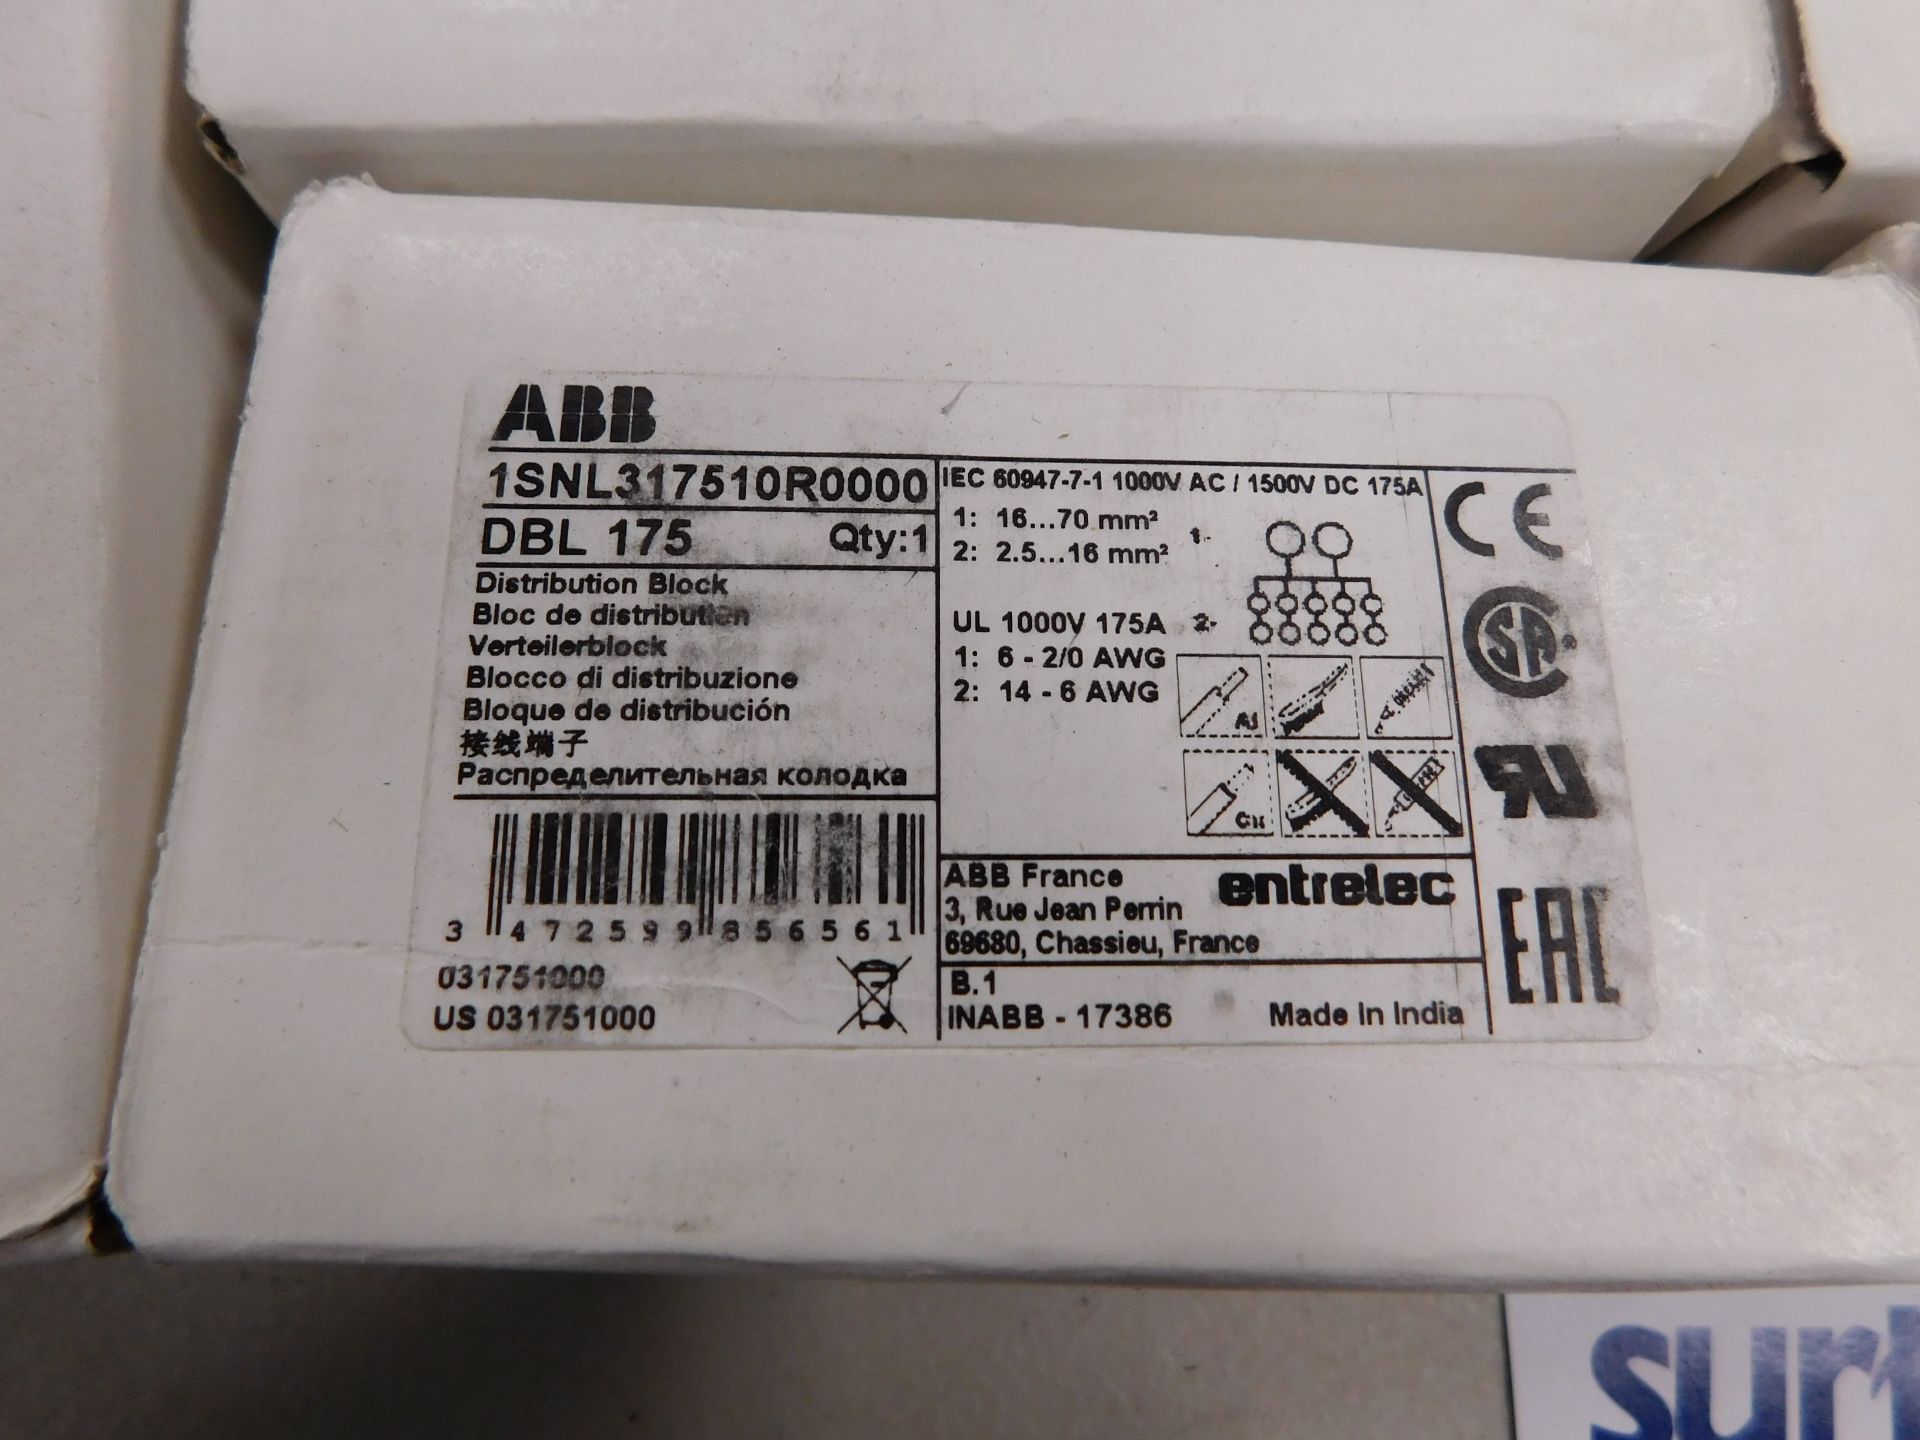 Lot of 14 ABB DBL175 - Image 3 of 3